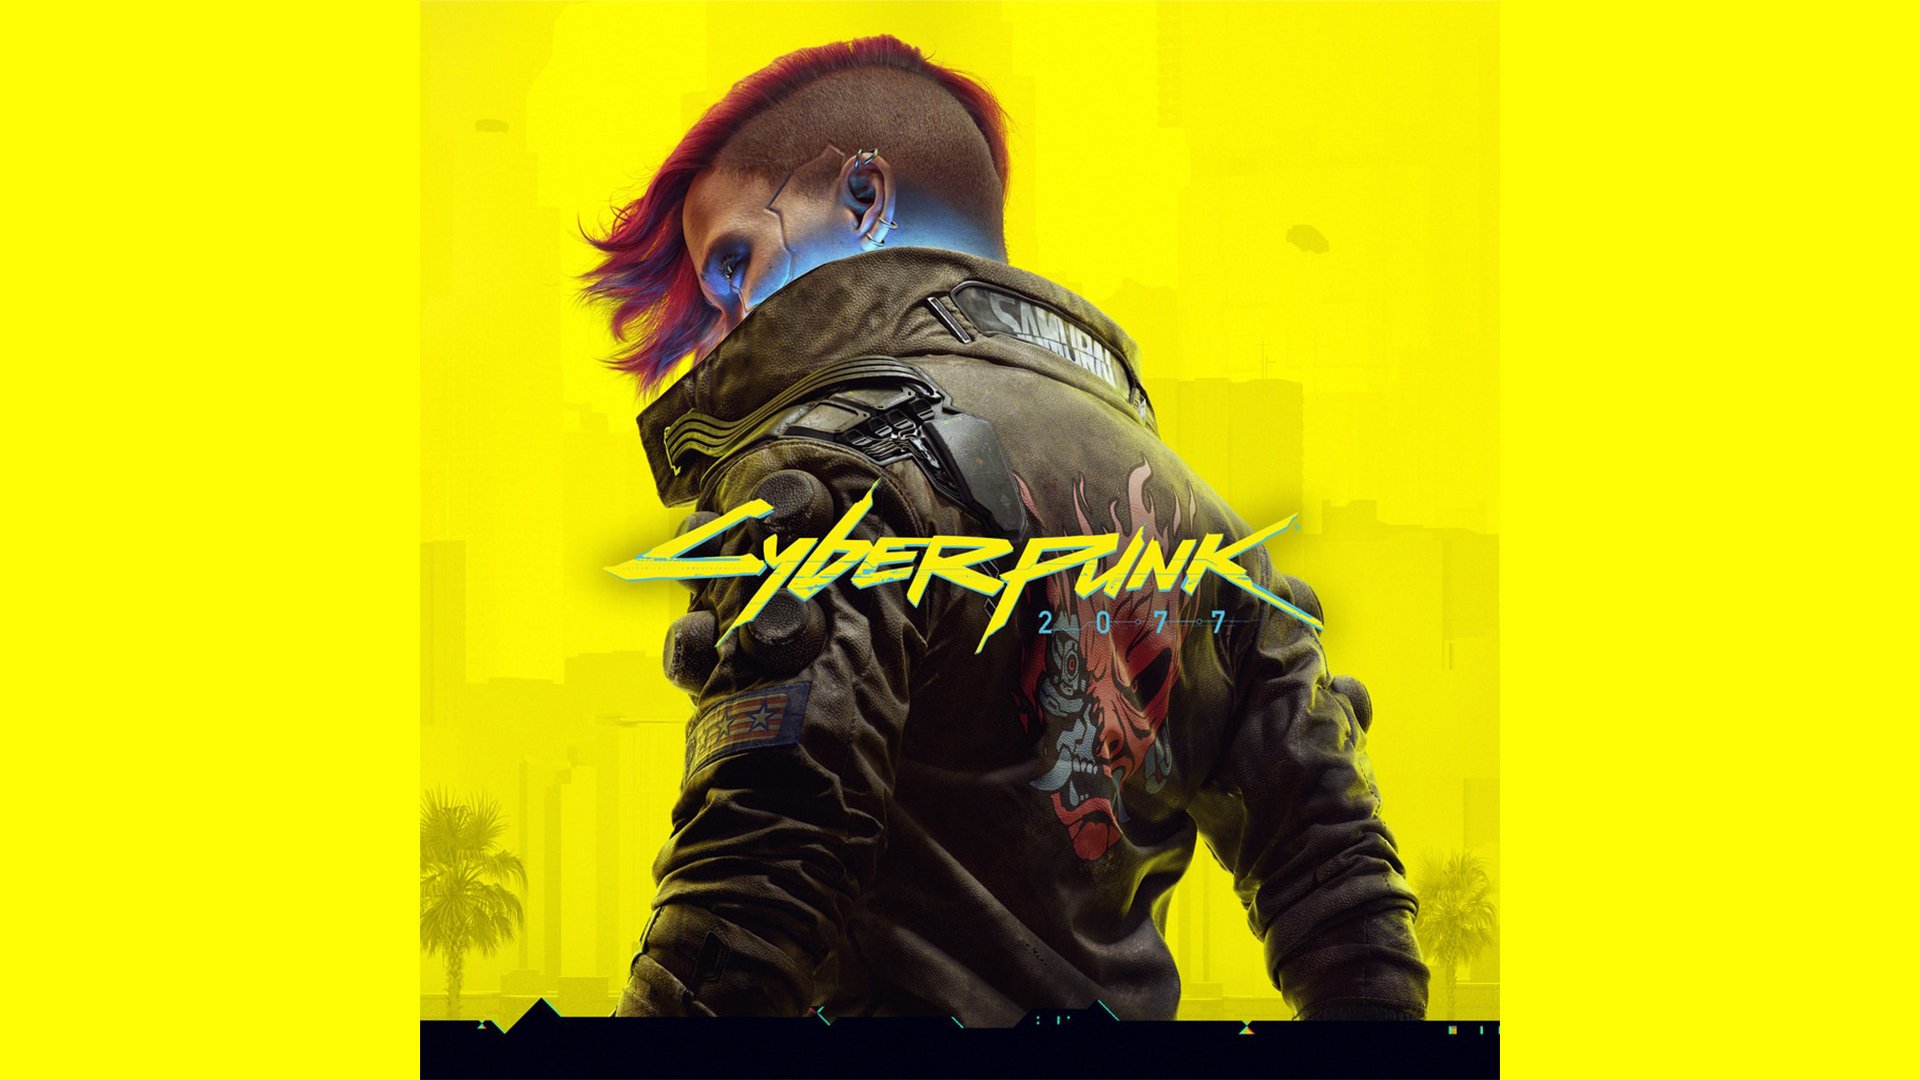 PS5 version of Cyberpunk 2077 seemingly spotted on PSN, hinting at